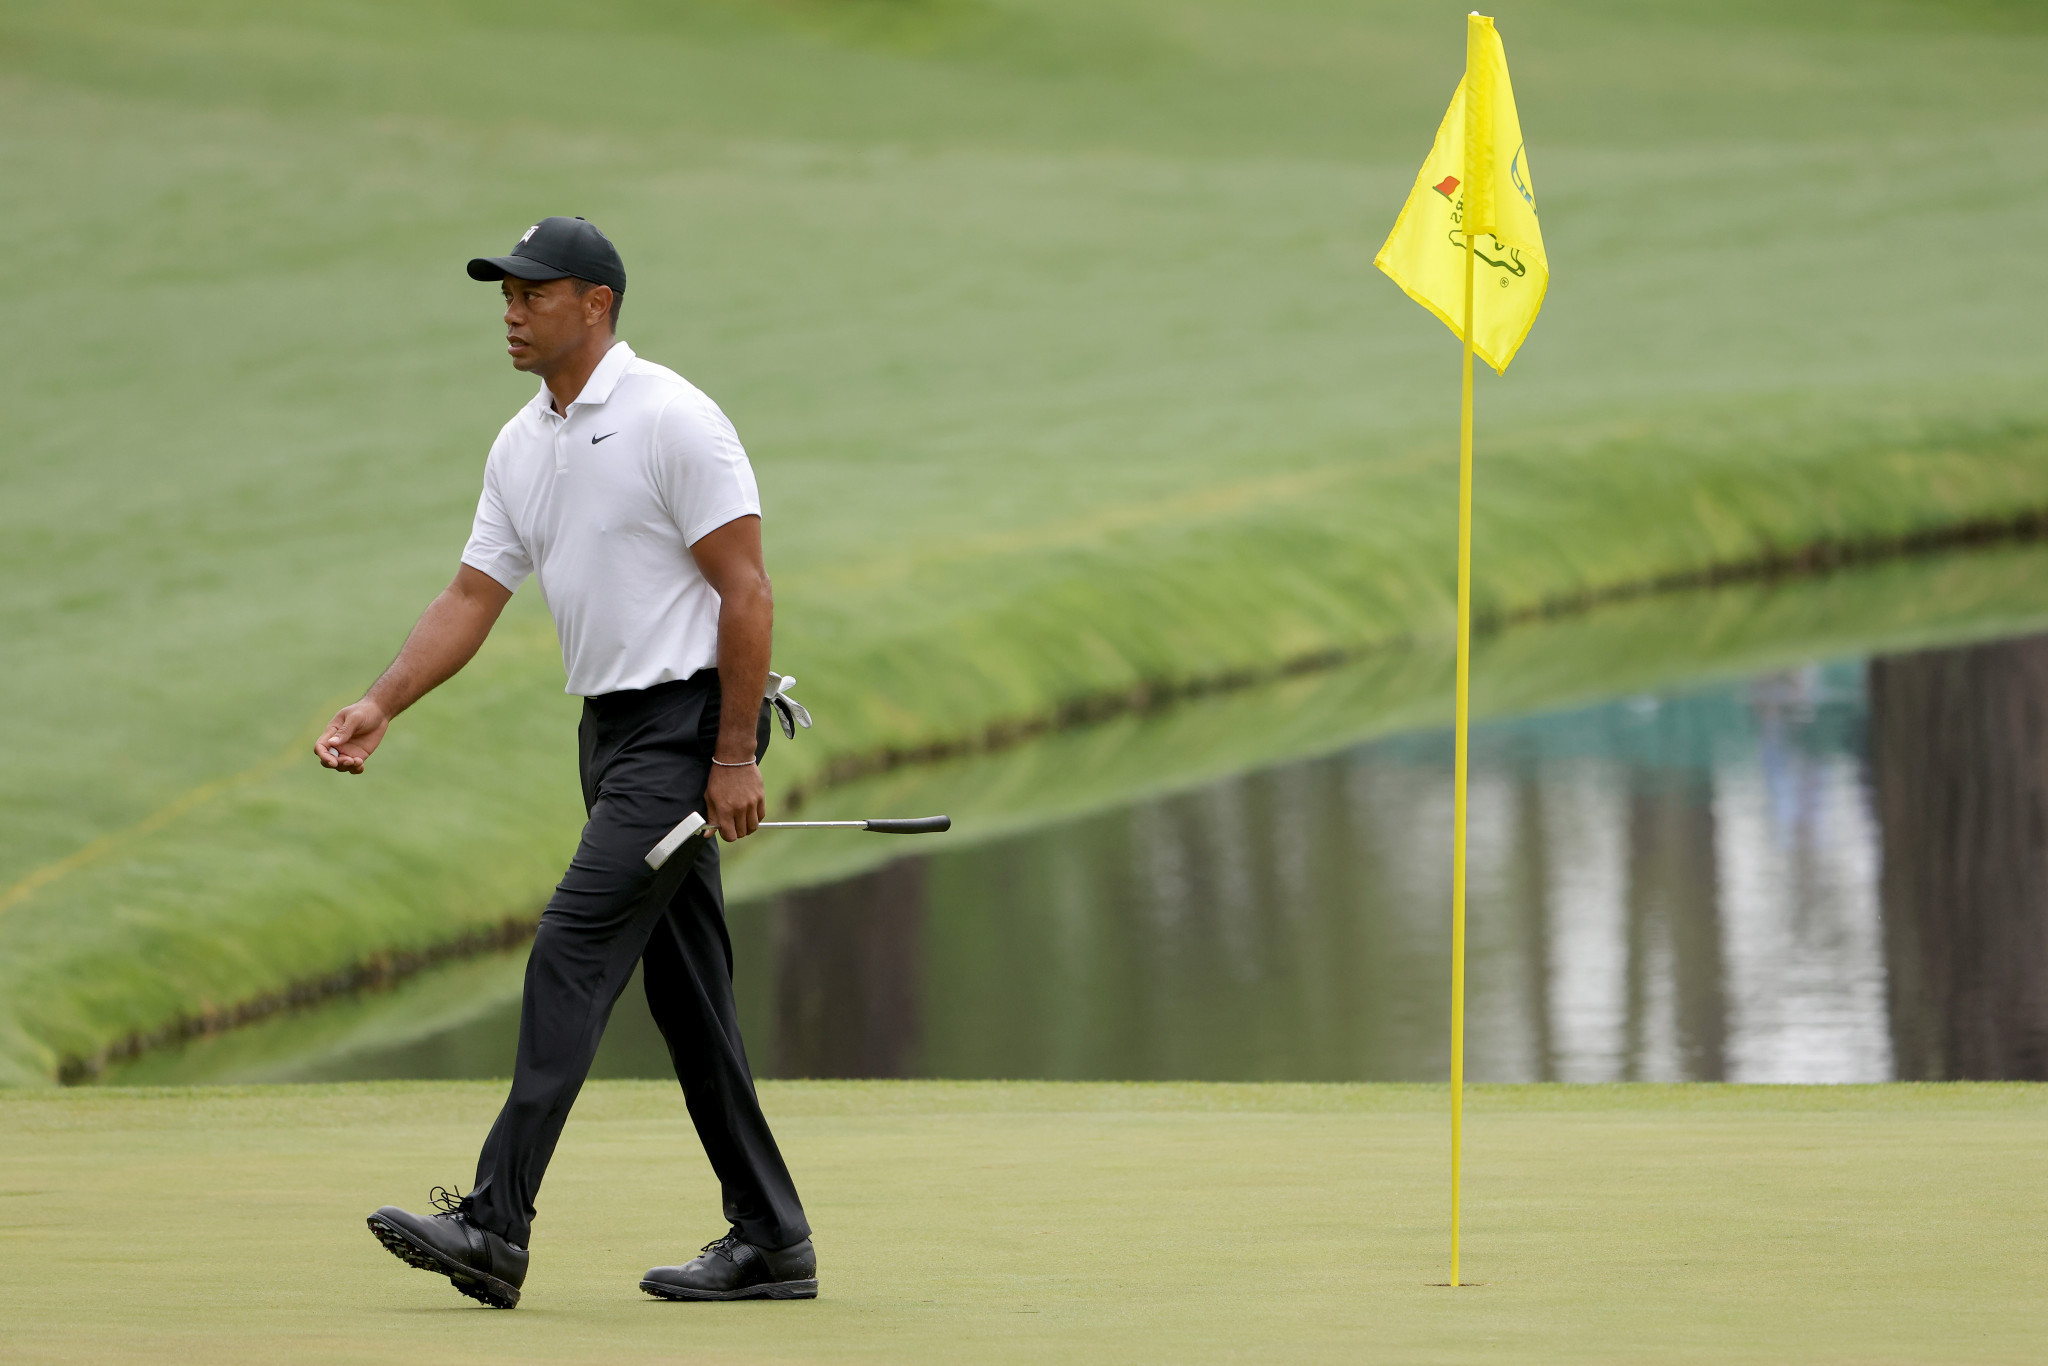 Tiger Woods is set to make his return to golf at The Masters ©Getty Images